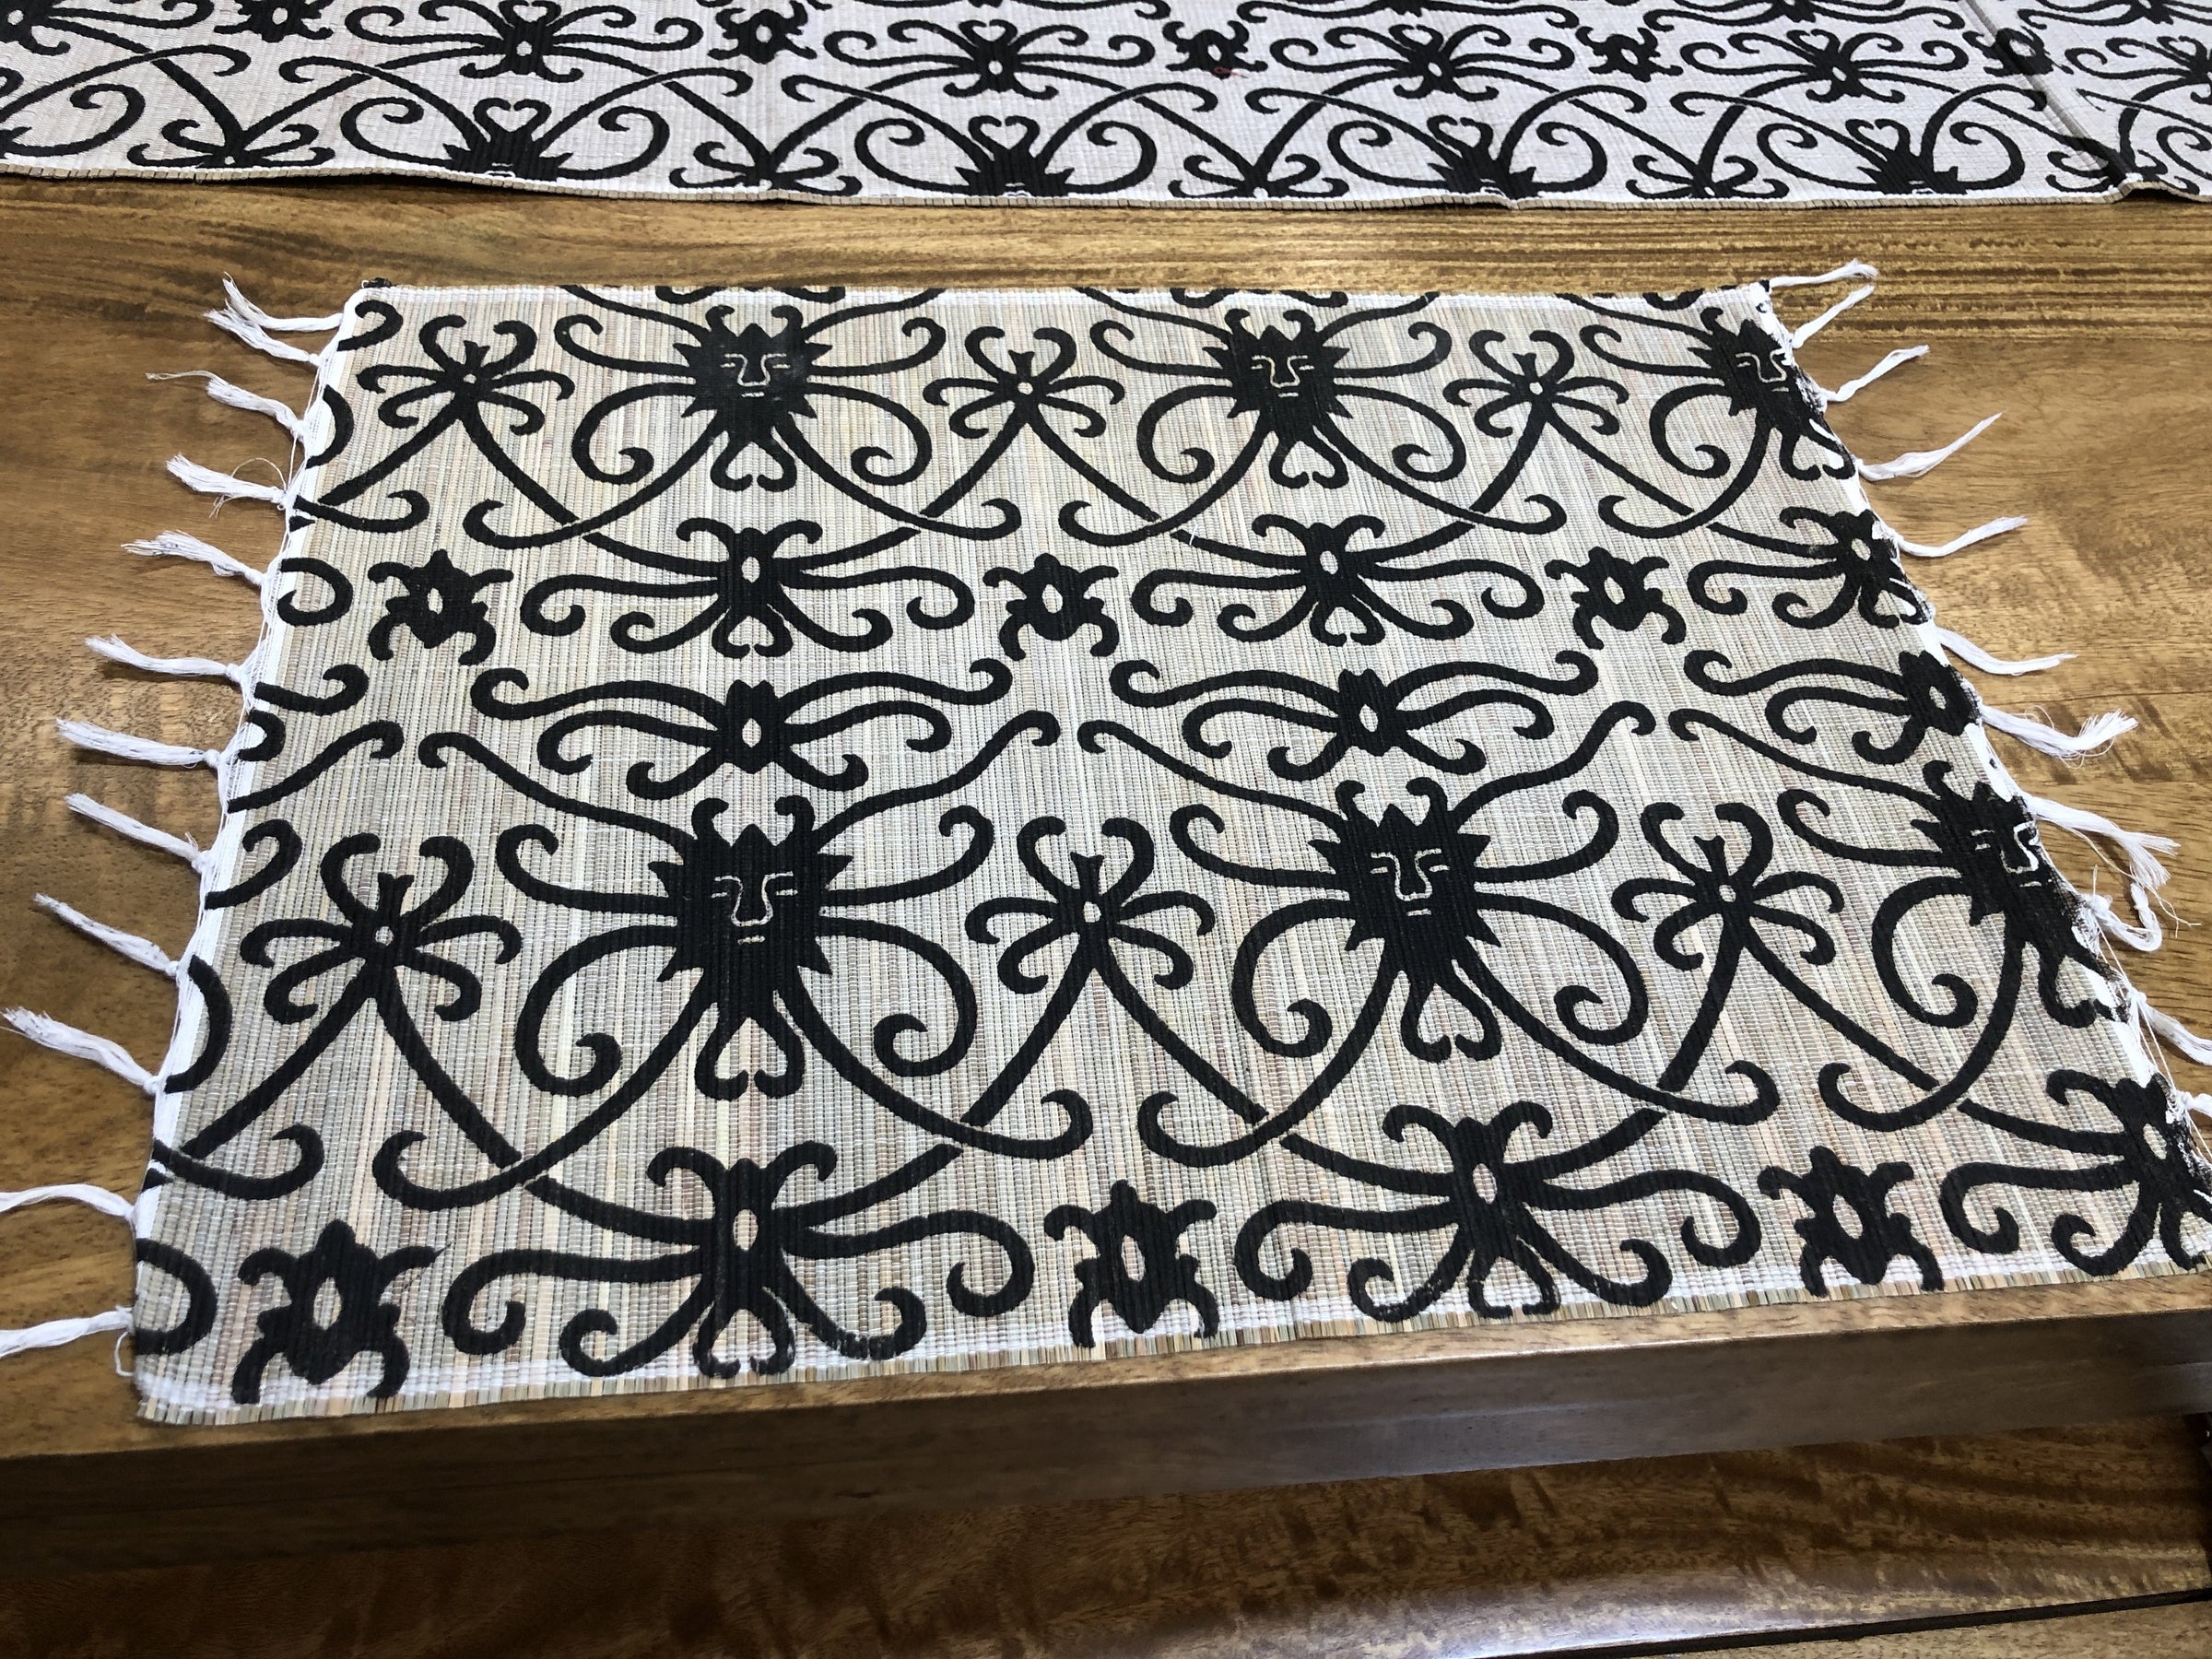 Mendong Fibre Table Runners and Placemat with Brown Print